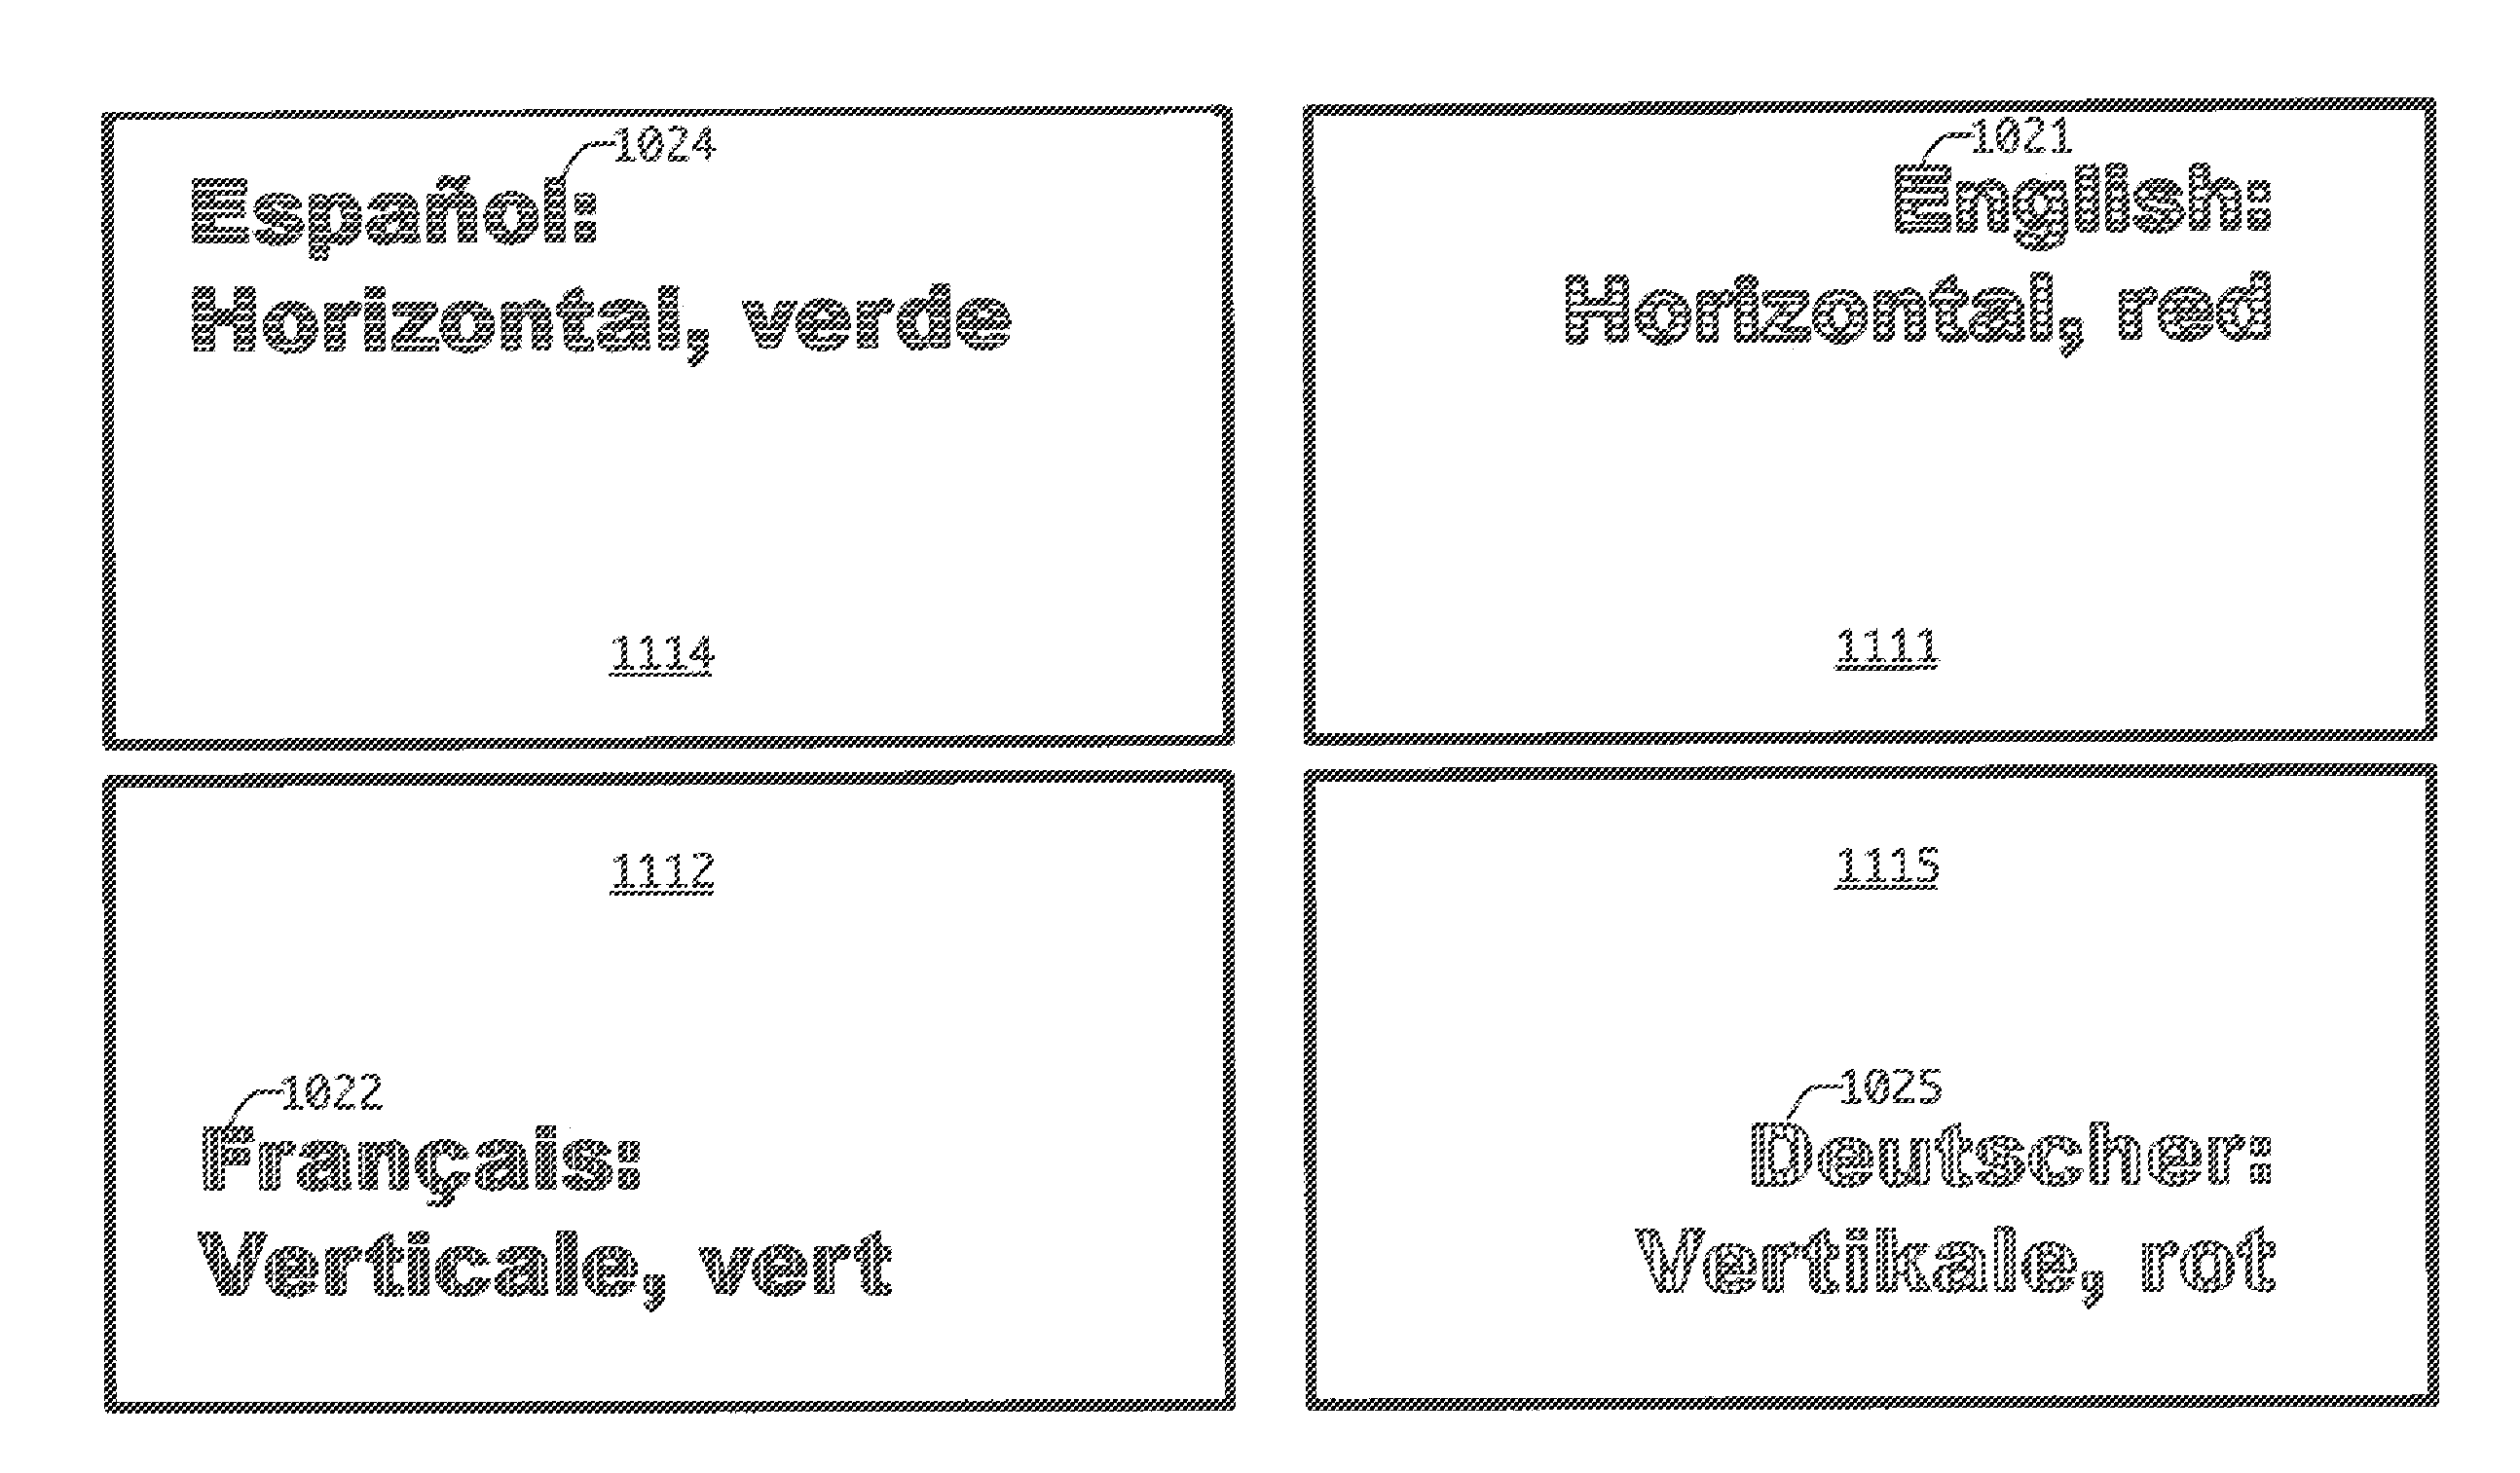 System and method for displaying captions